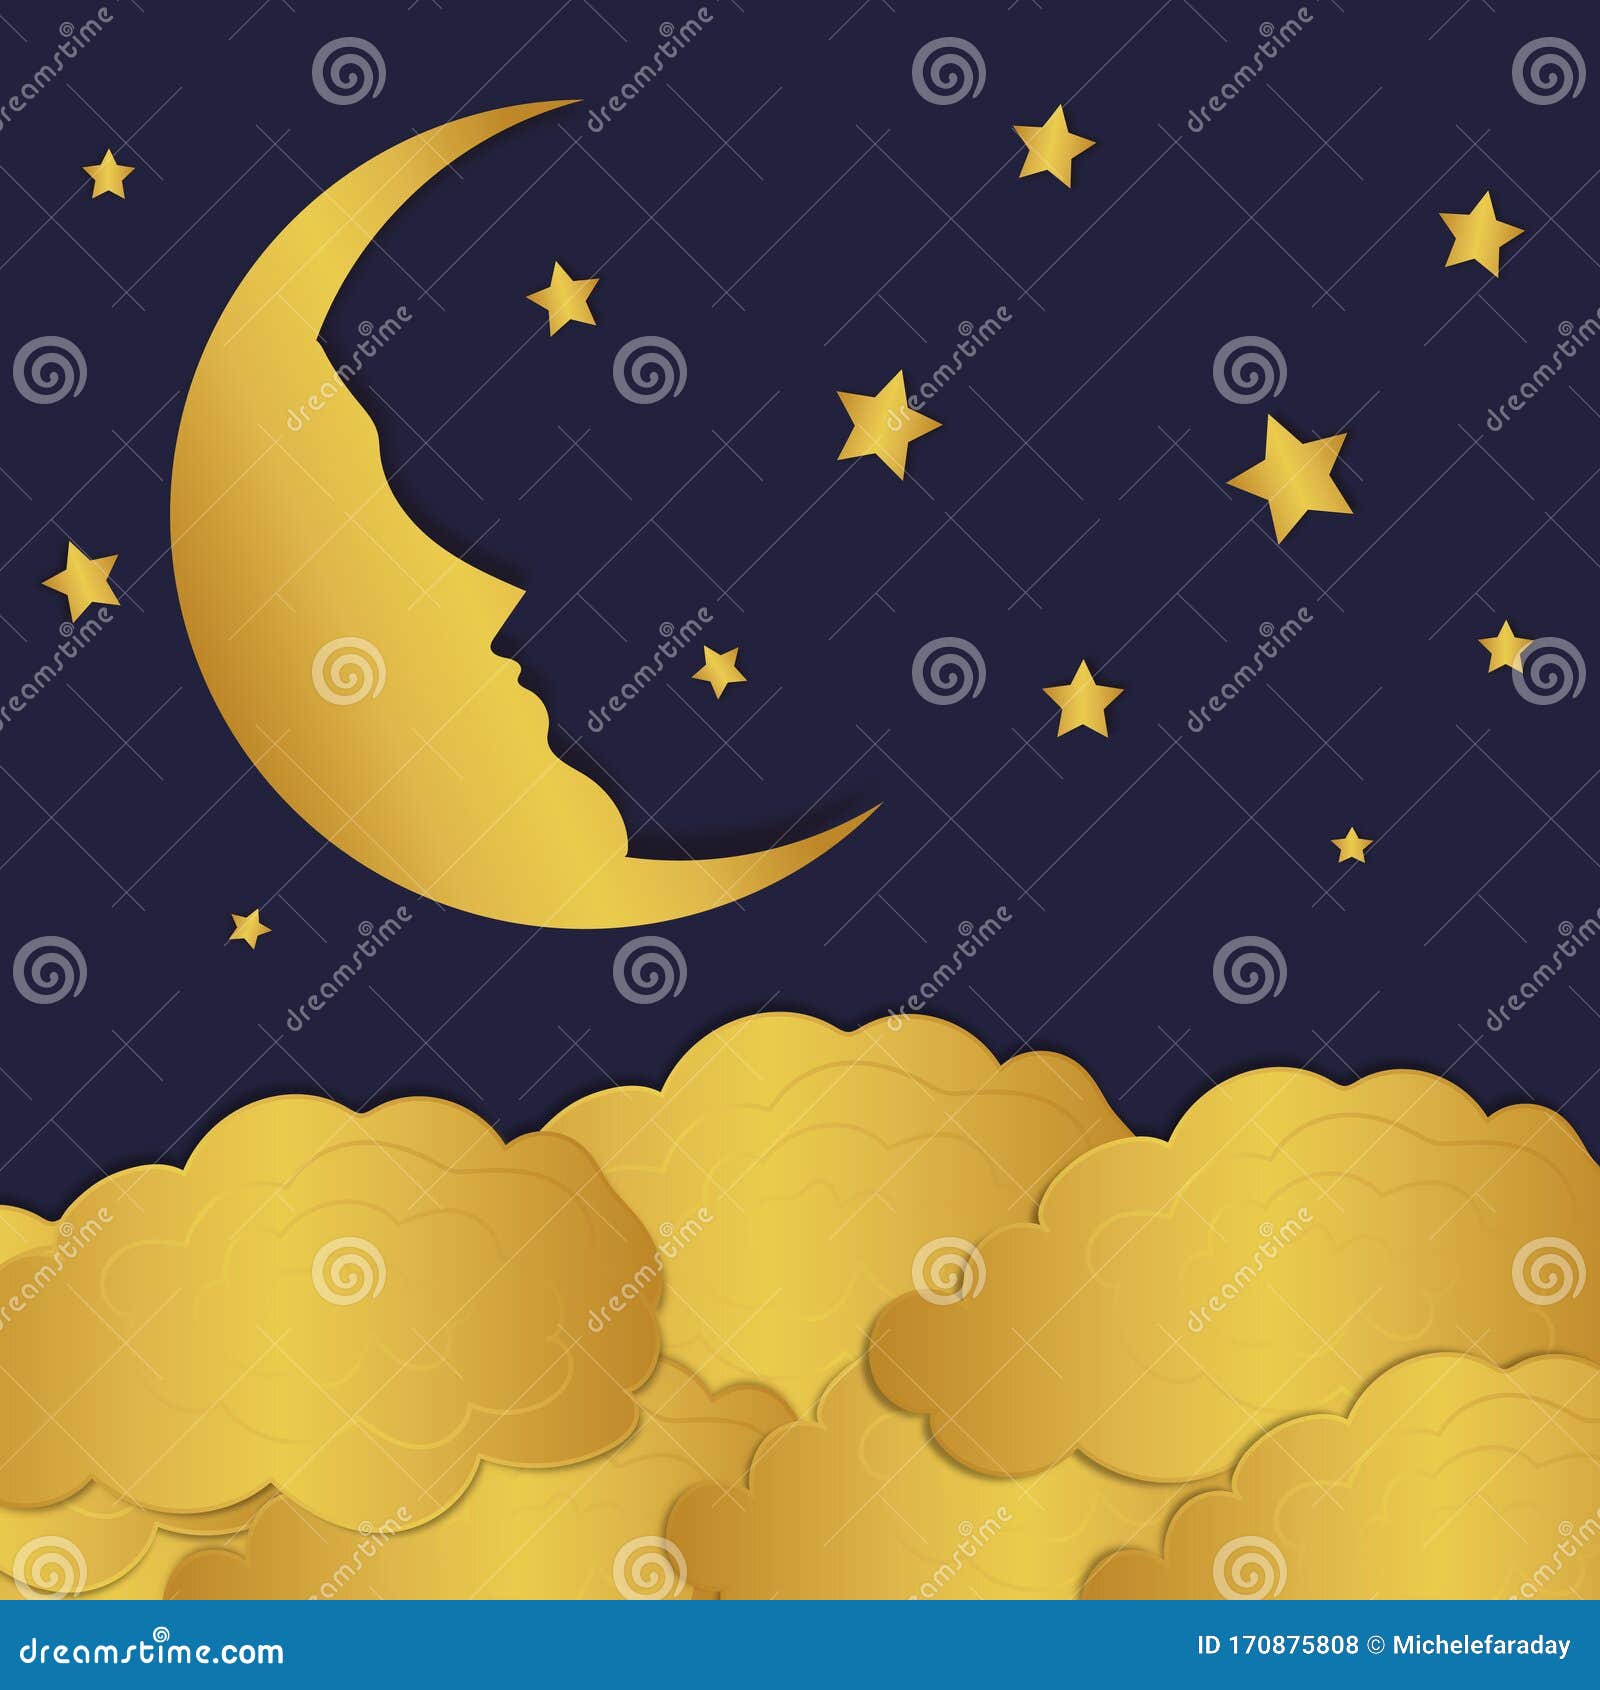 Golden Moon, Stars and Clouds Vector Illustration on a Blue ...